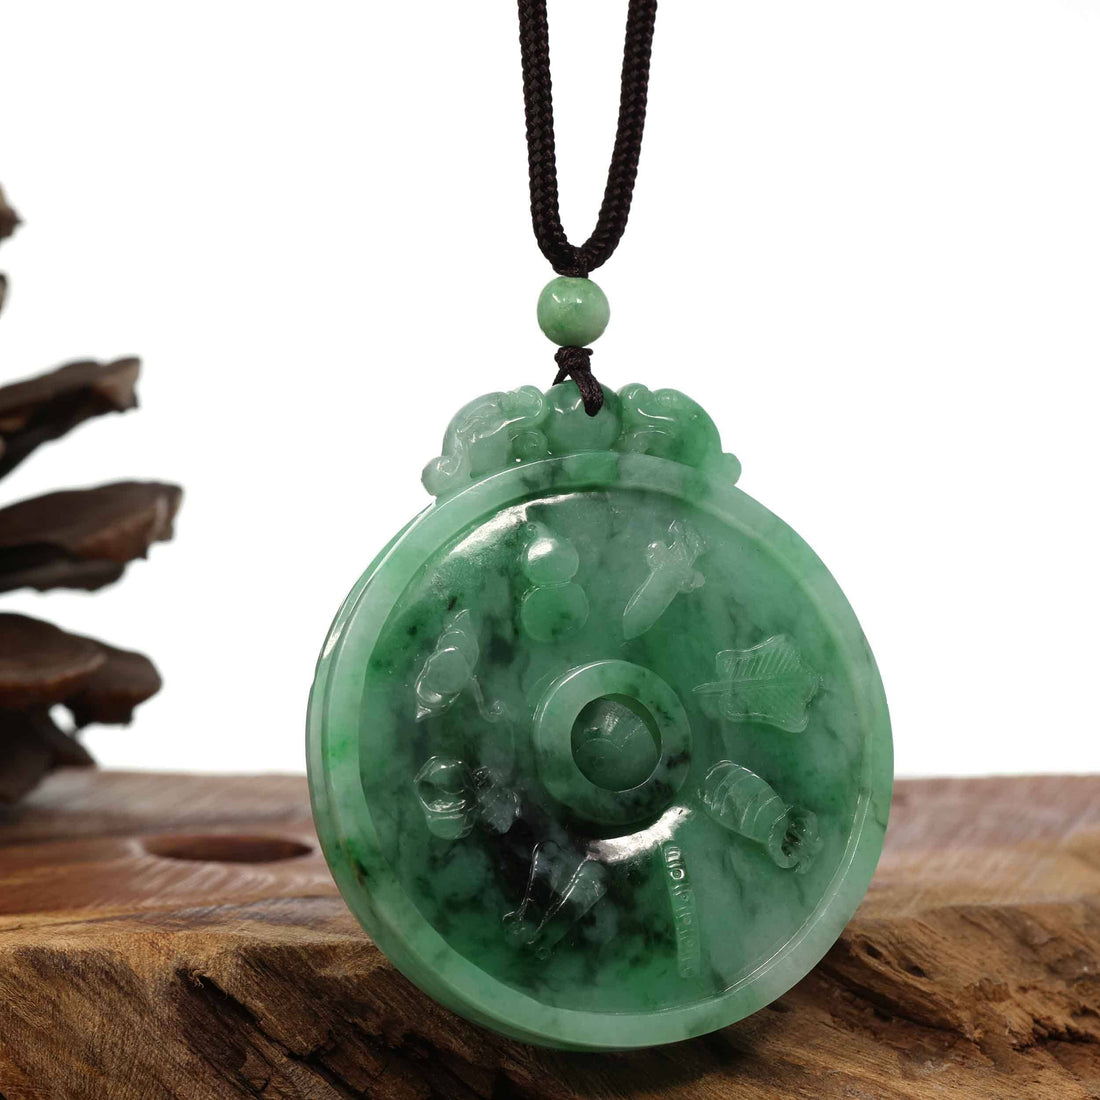 Baikalla Jewelry Jade Pendant Necklace Copy of Genuine Green Jadeite Jade "Good Luck Money Circle with Dragon Accent" Pendant Necklace With Real Jadeite Bead Necklace